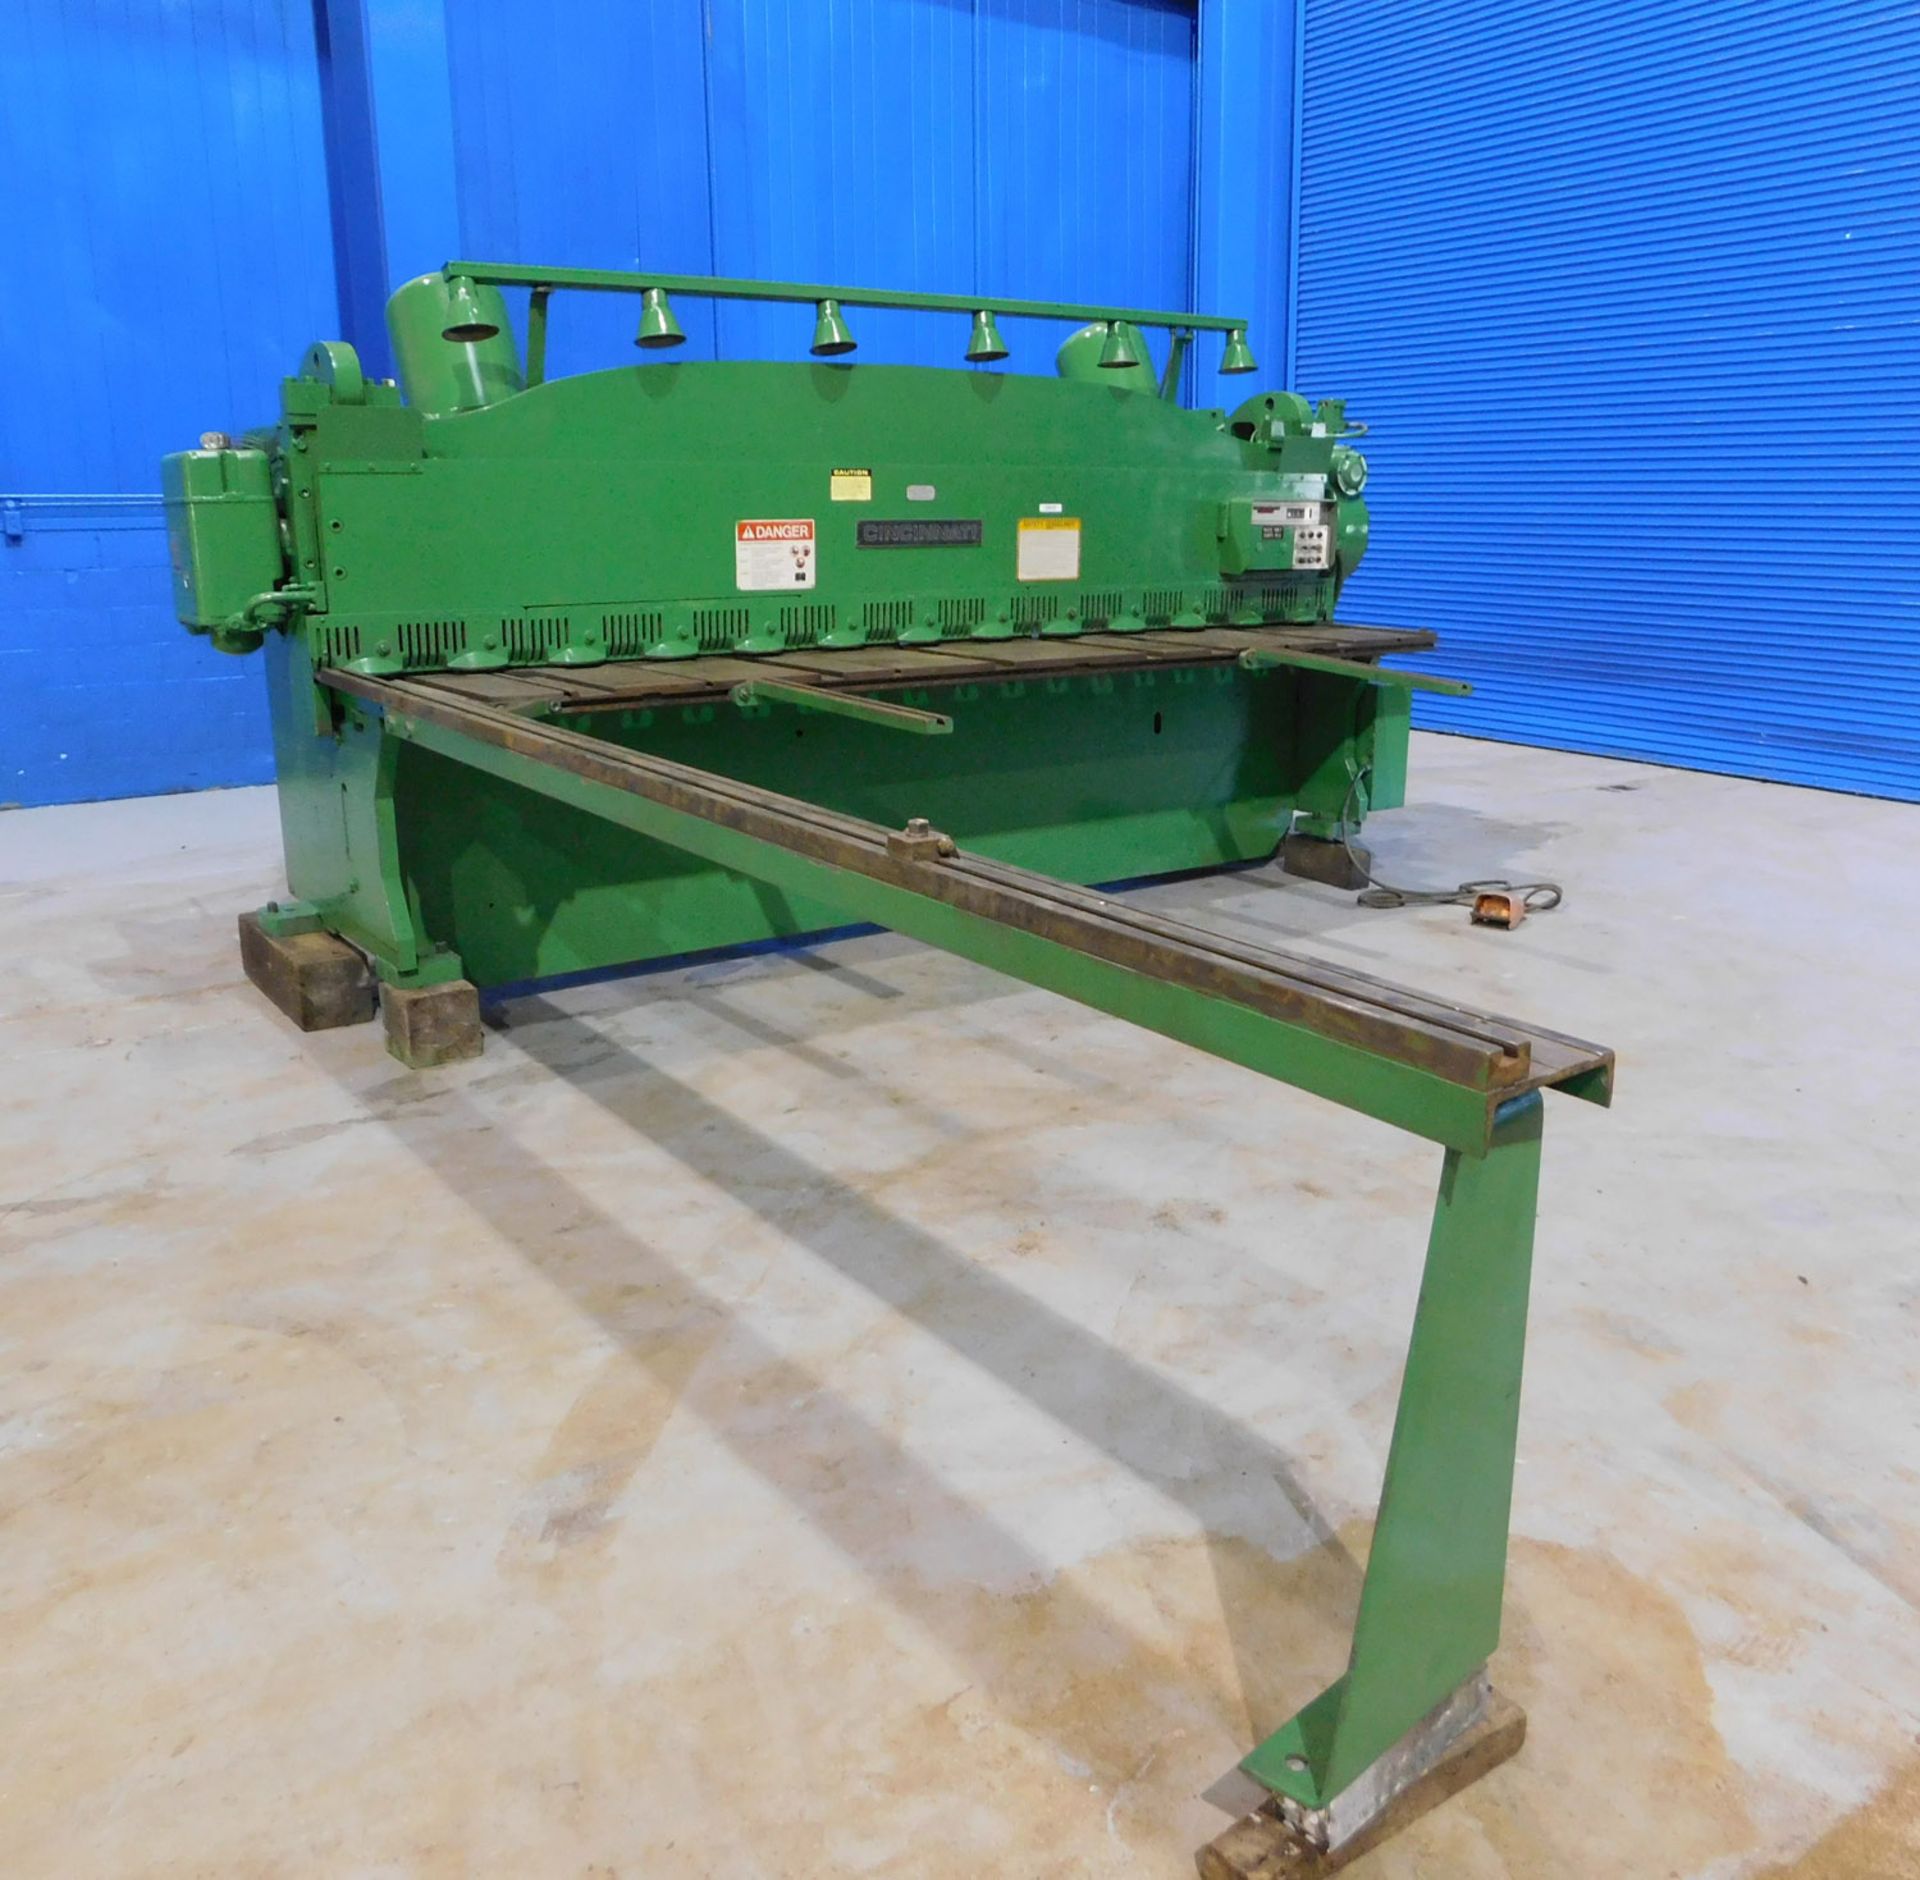 Cincinnati Power Shear, 1/4" x 12', Mdl: 2CC12, S/N: 44341 (5991P) (Located In Painesville, OH) - Image 2 of 8